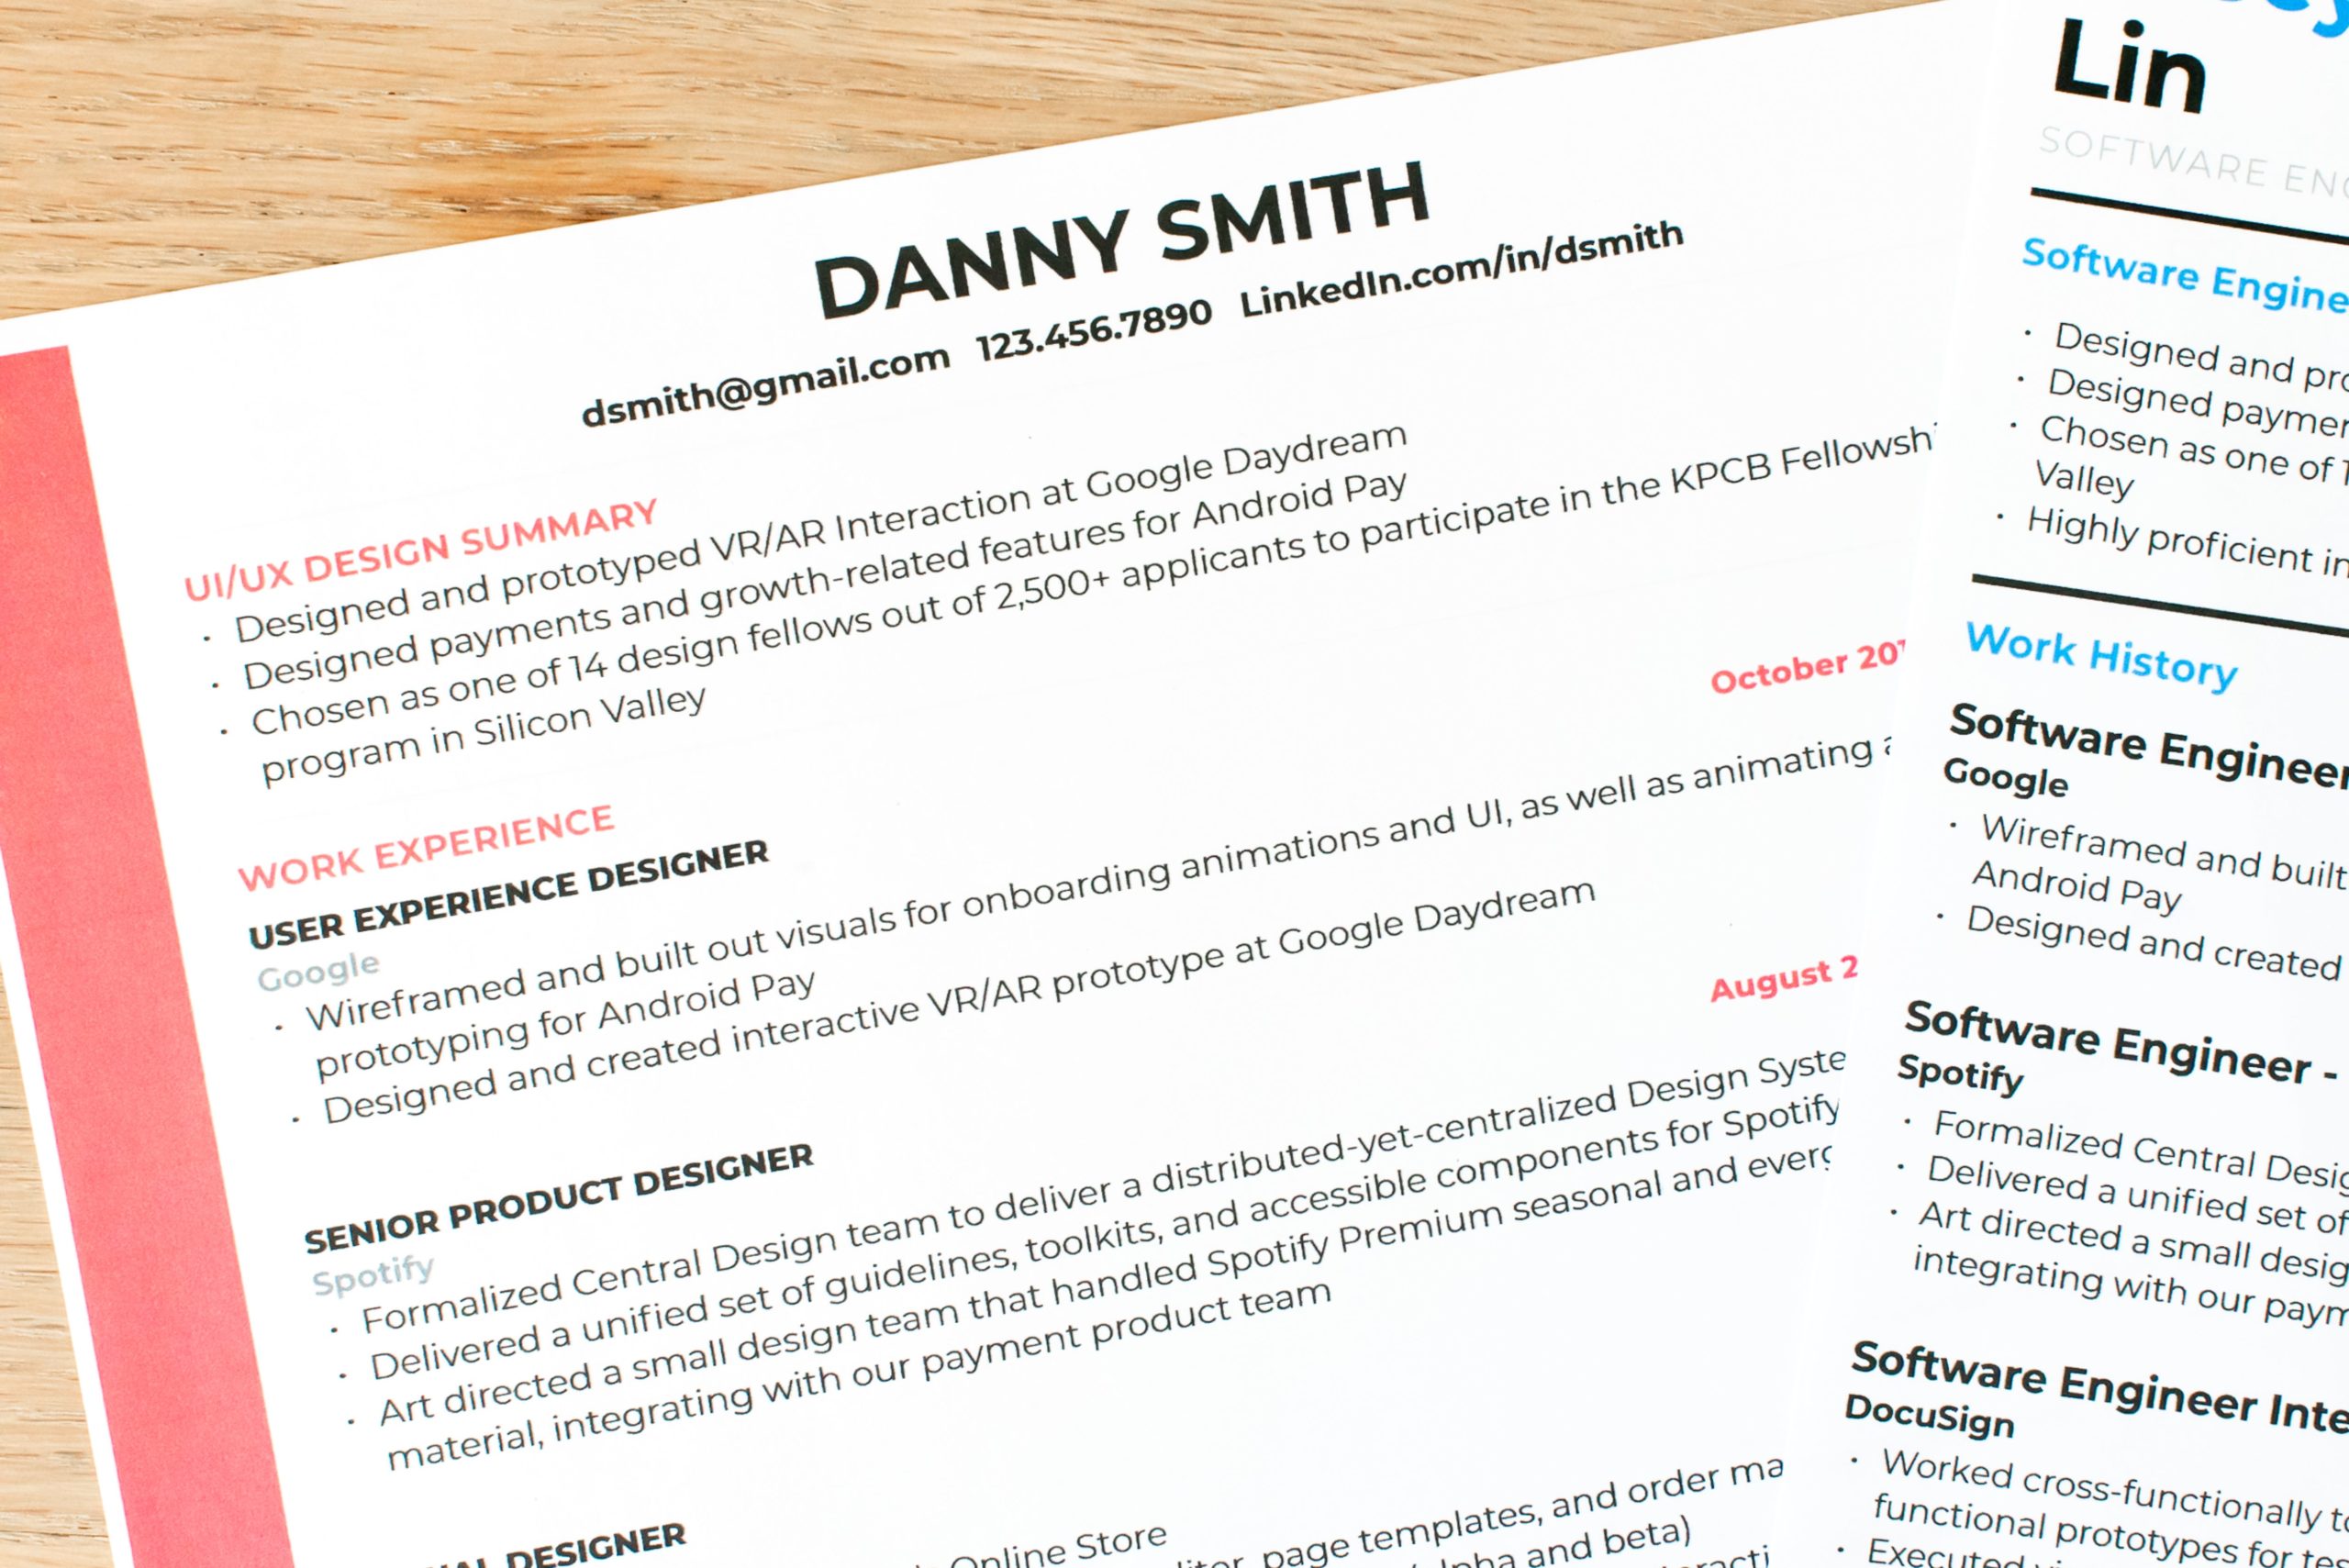 How To Write A Resume Objective That Wins More Jobs [23+ Examples]